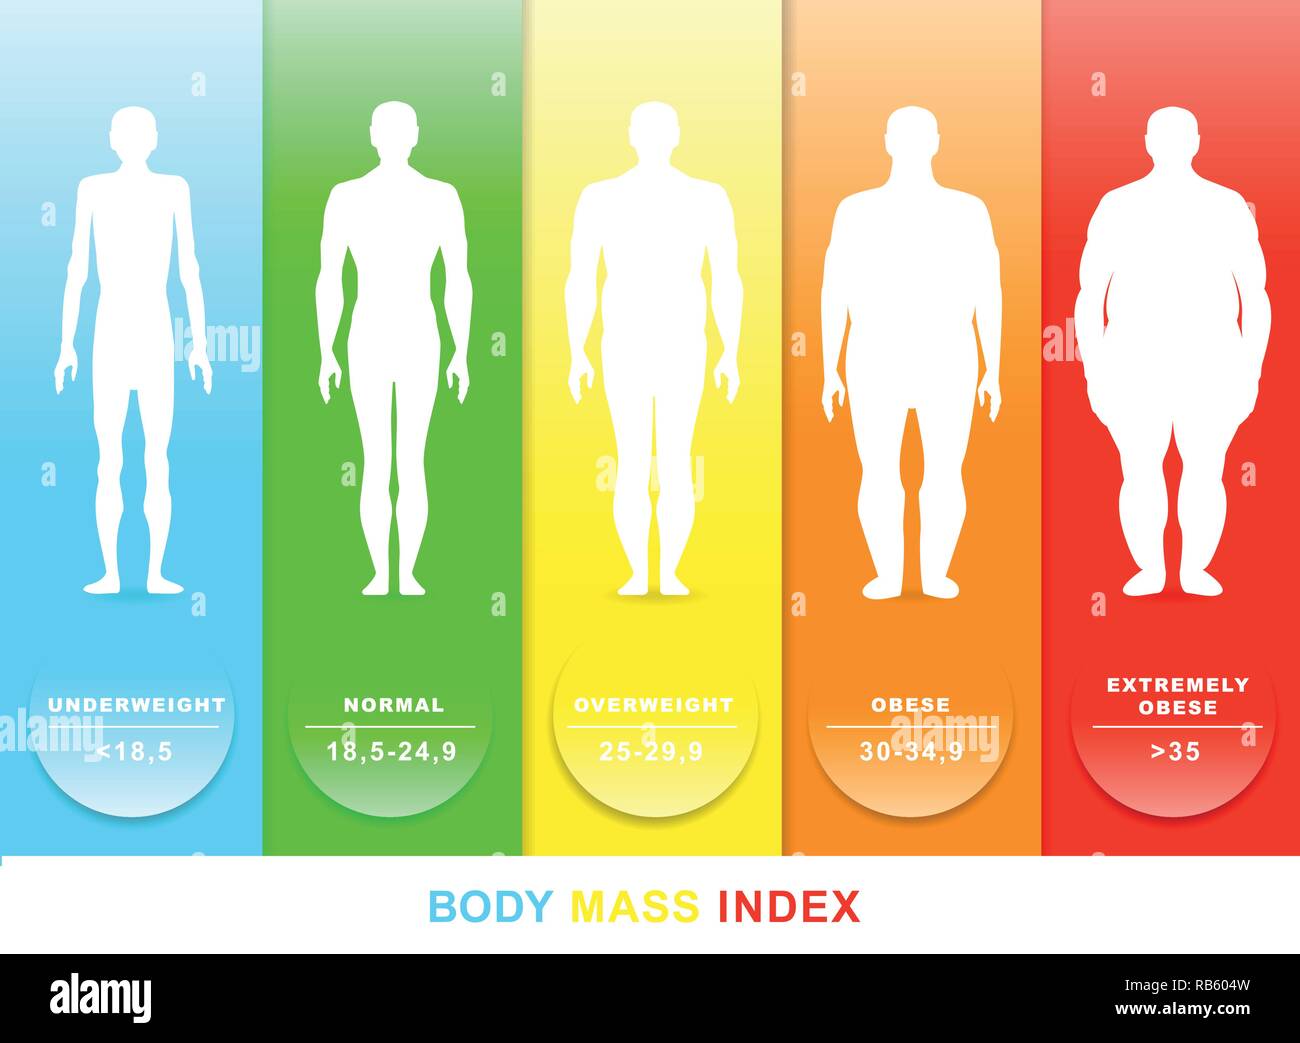 BMI, body mass index chart, vector illustration. Obese, overweight